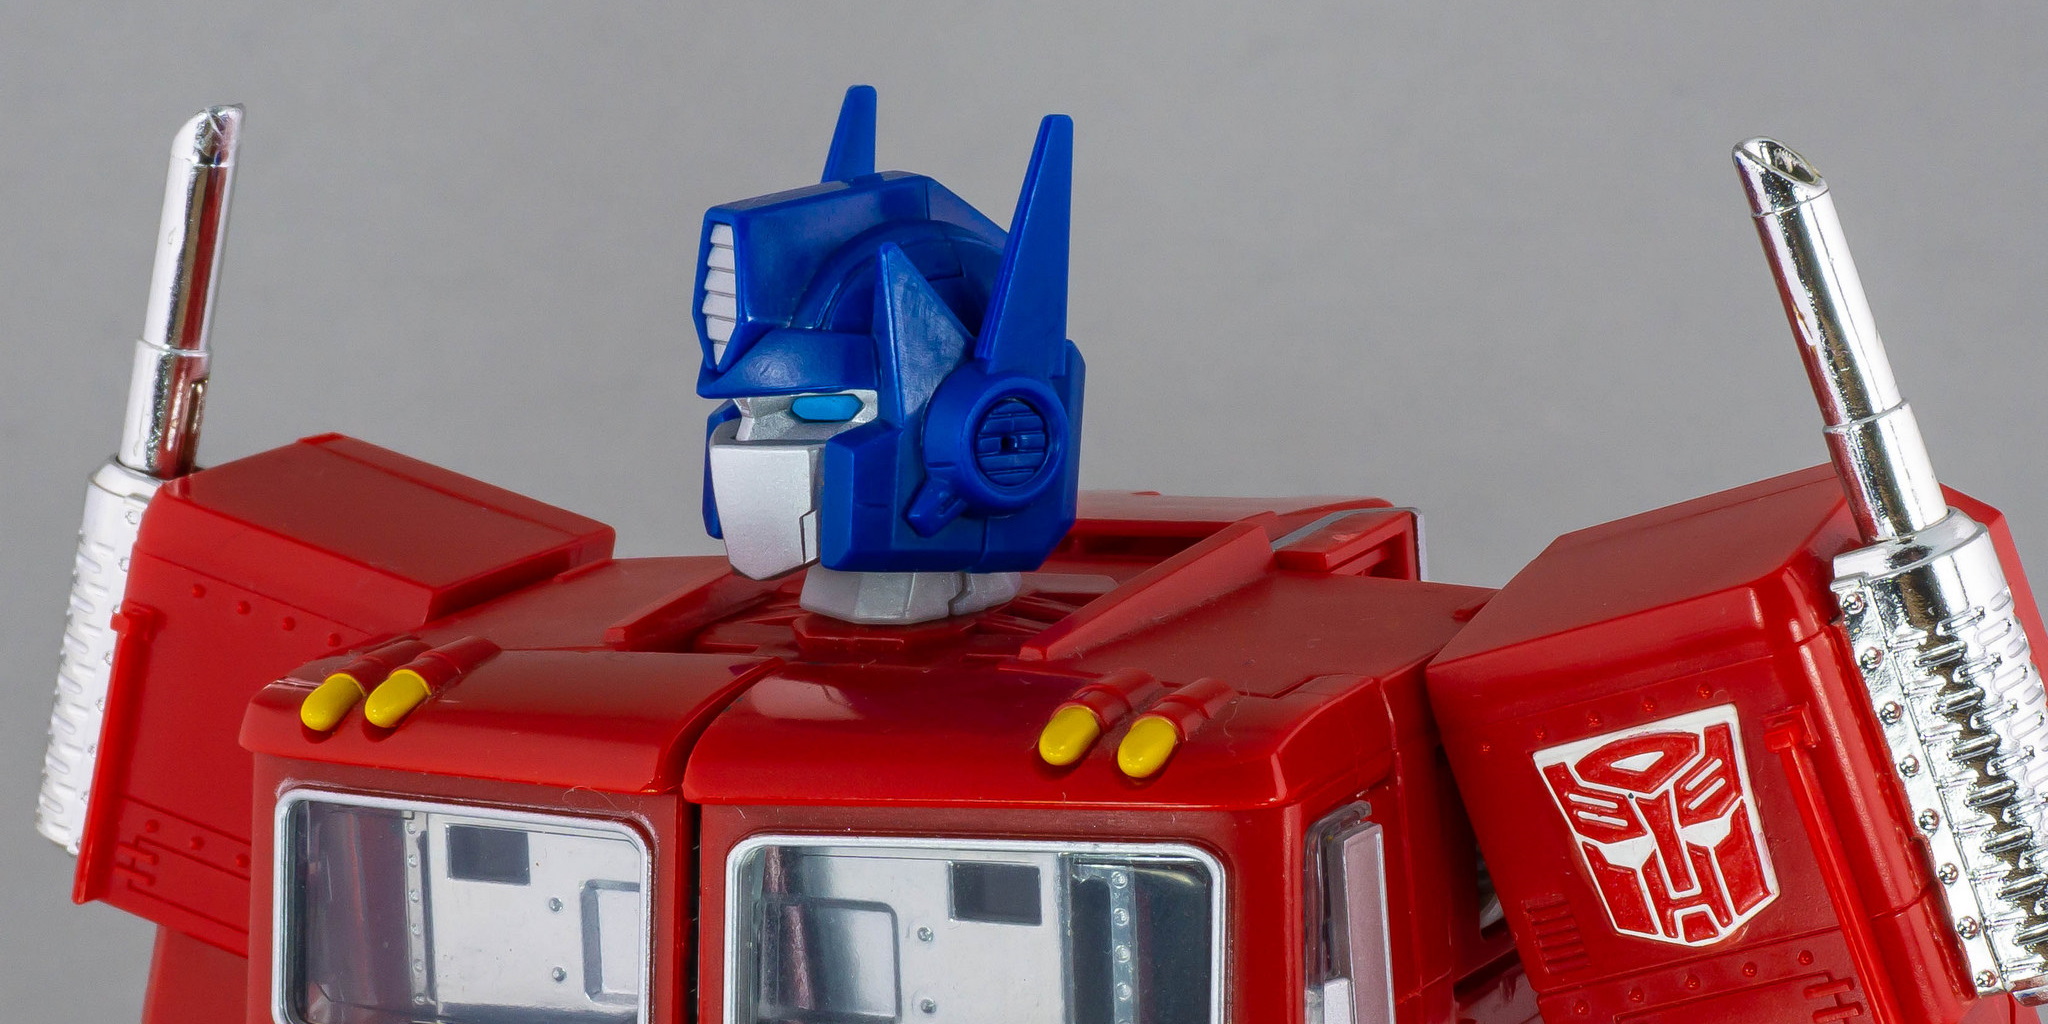 An icon of my childhood: Optimus Prime, Masterpiece version